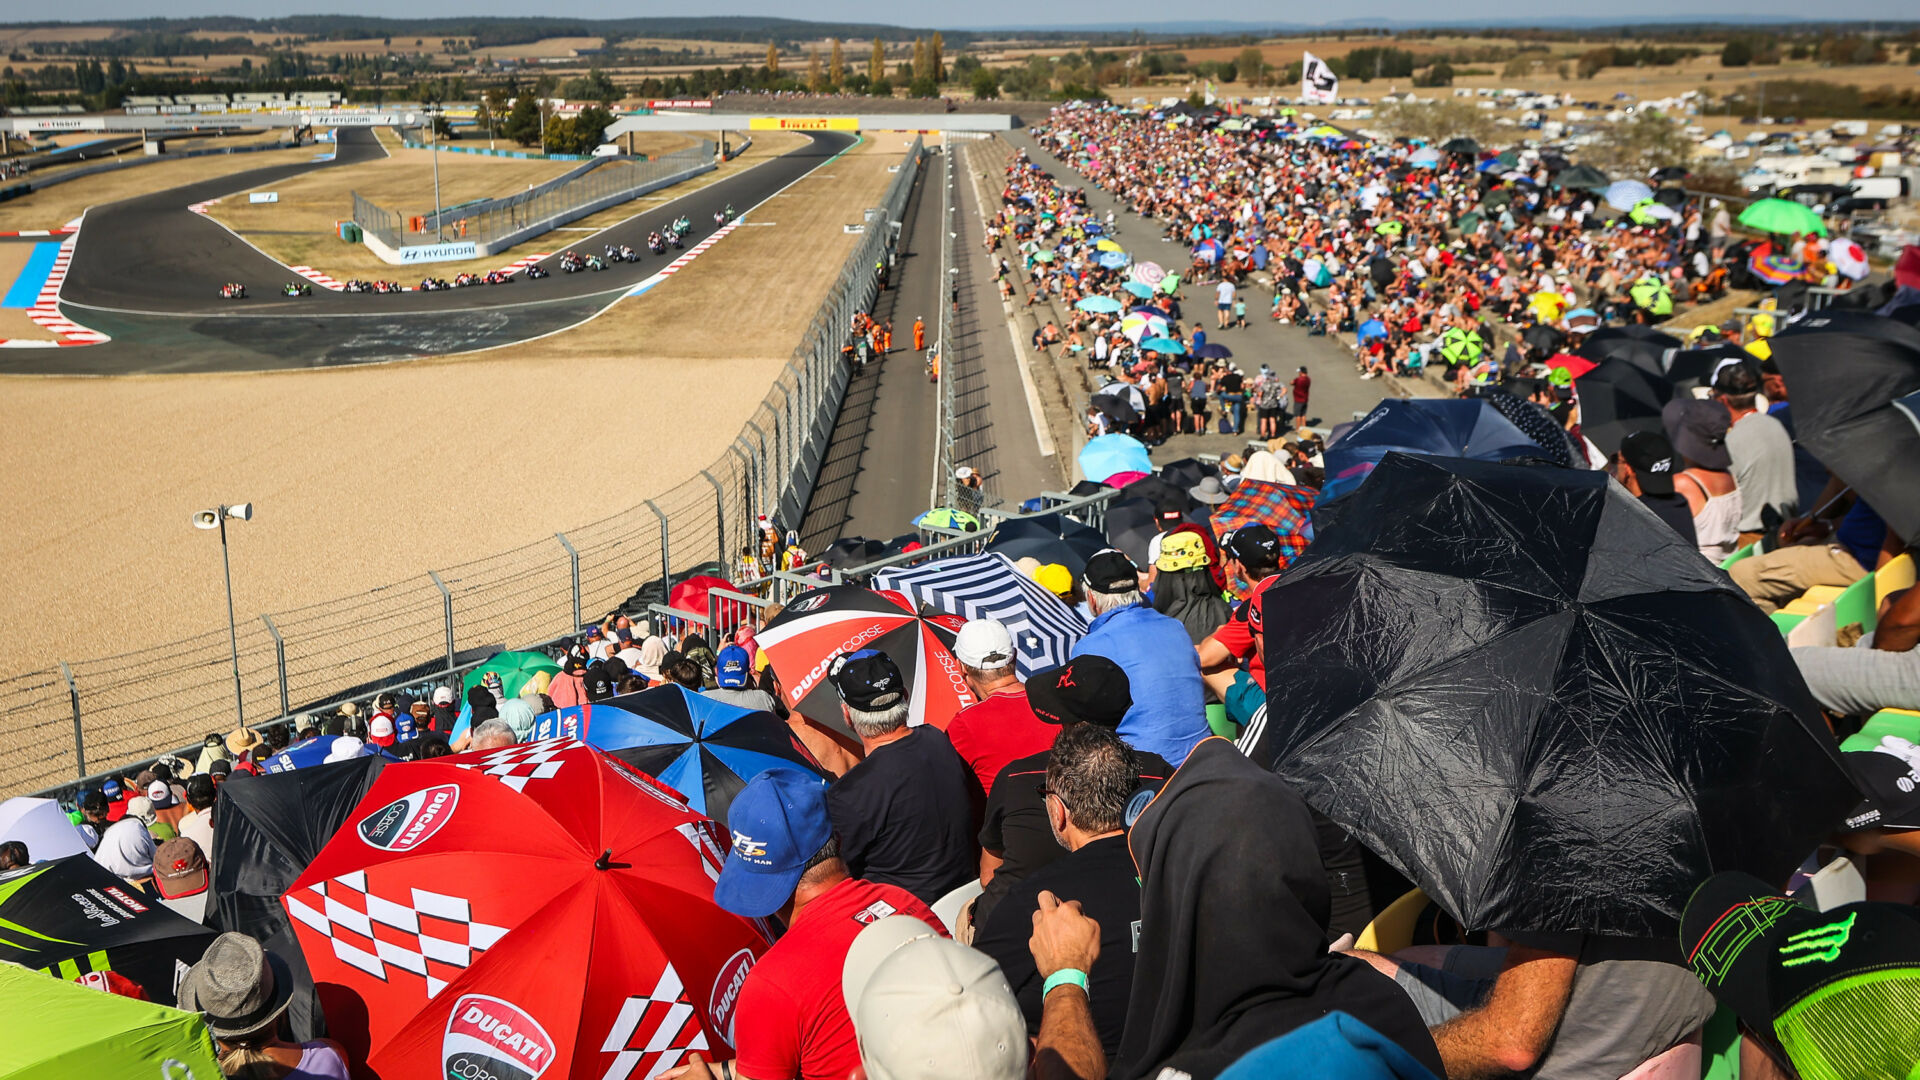 Circuit de Nevers Magny-Cours, in France, will continue hosting the FIM Superbike World Championship through at least 2027. Photo courtesy Dorna.